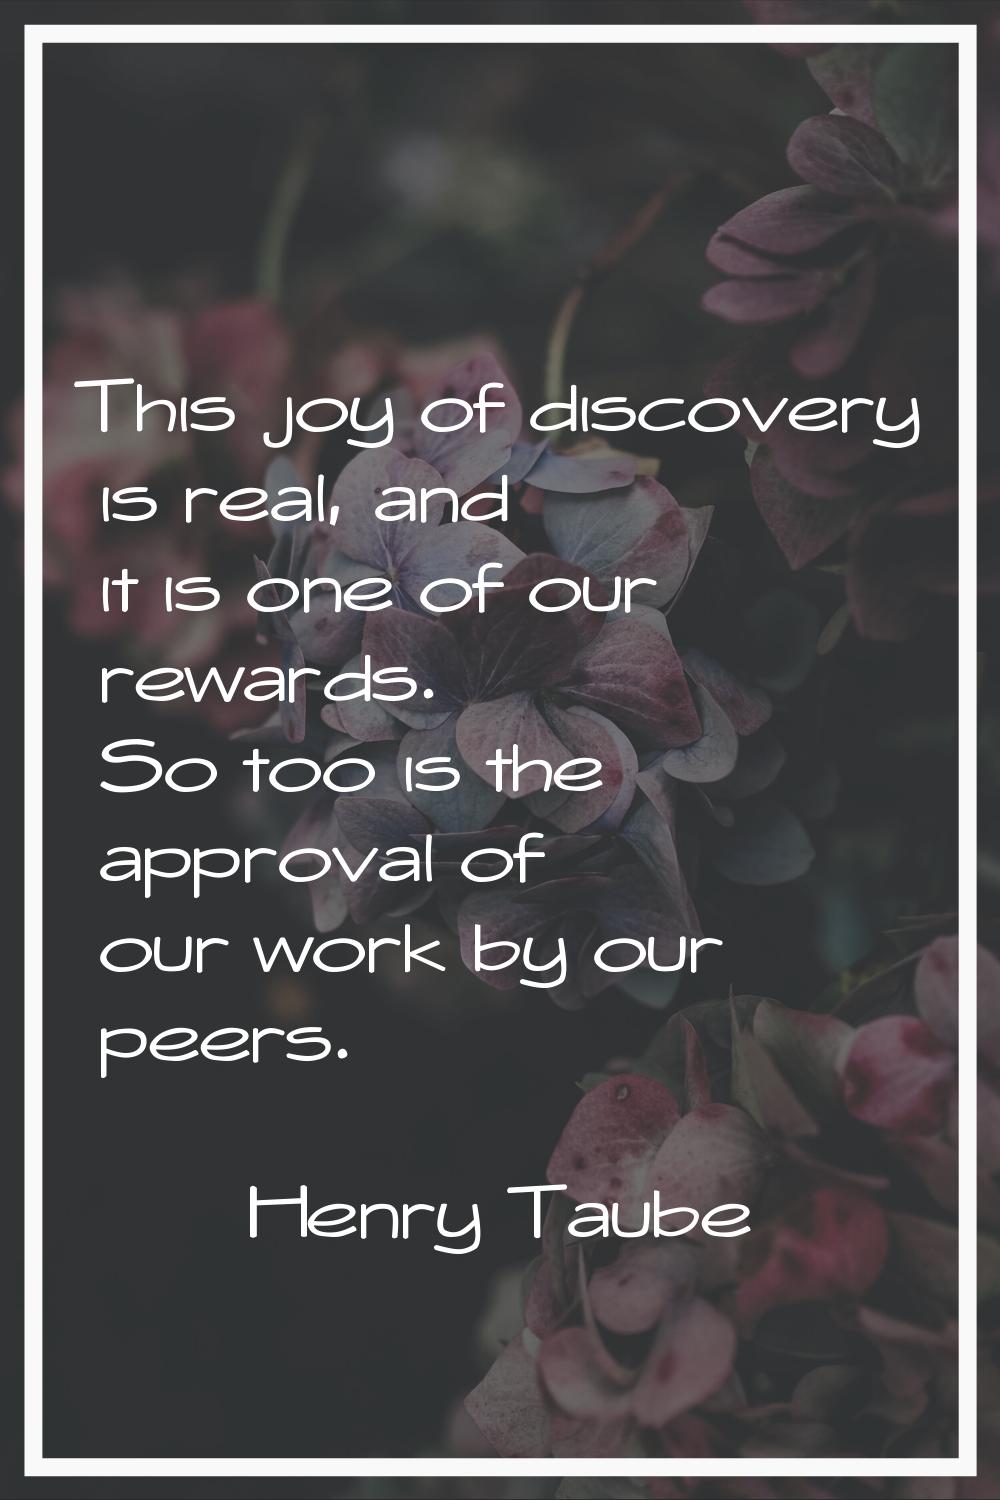 This joy of discovery is real, and it is one of our rewards. So too is the approval of our work by 